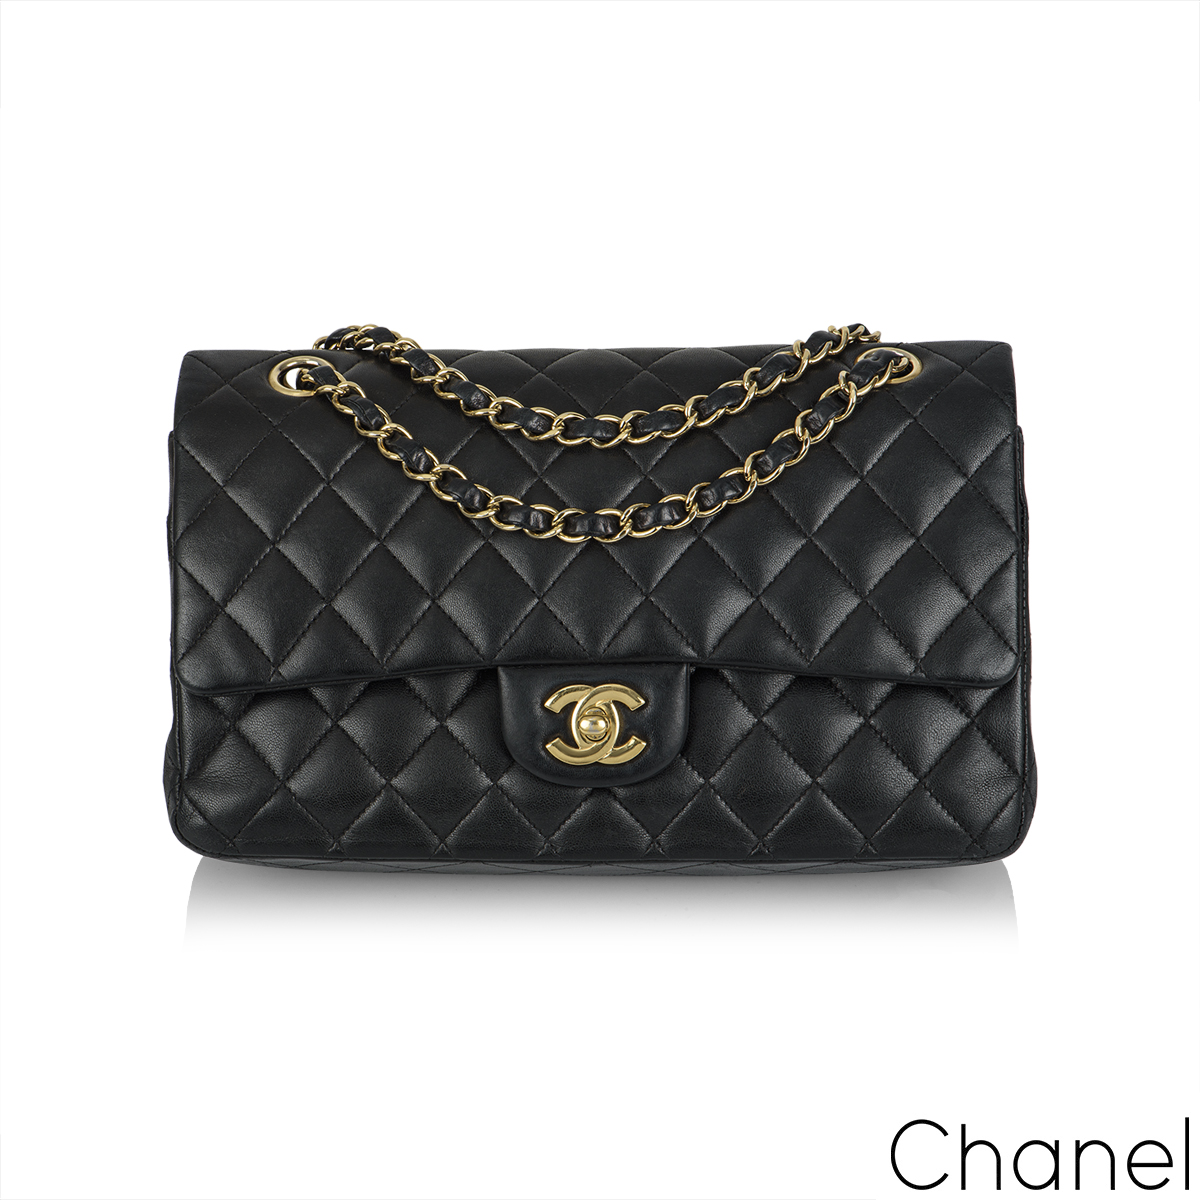 PREORDER CHANEL WALLET ON CHAIN PEARL CRUSH  Lazada Singapore